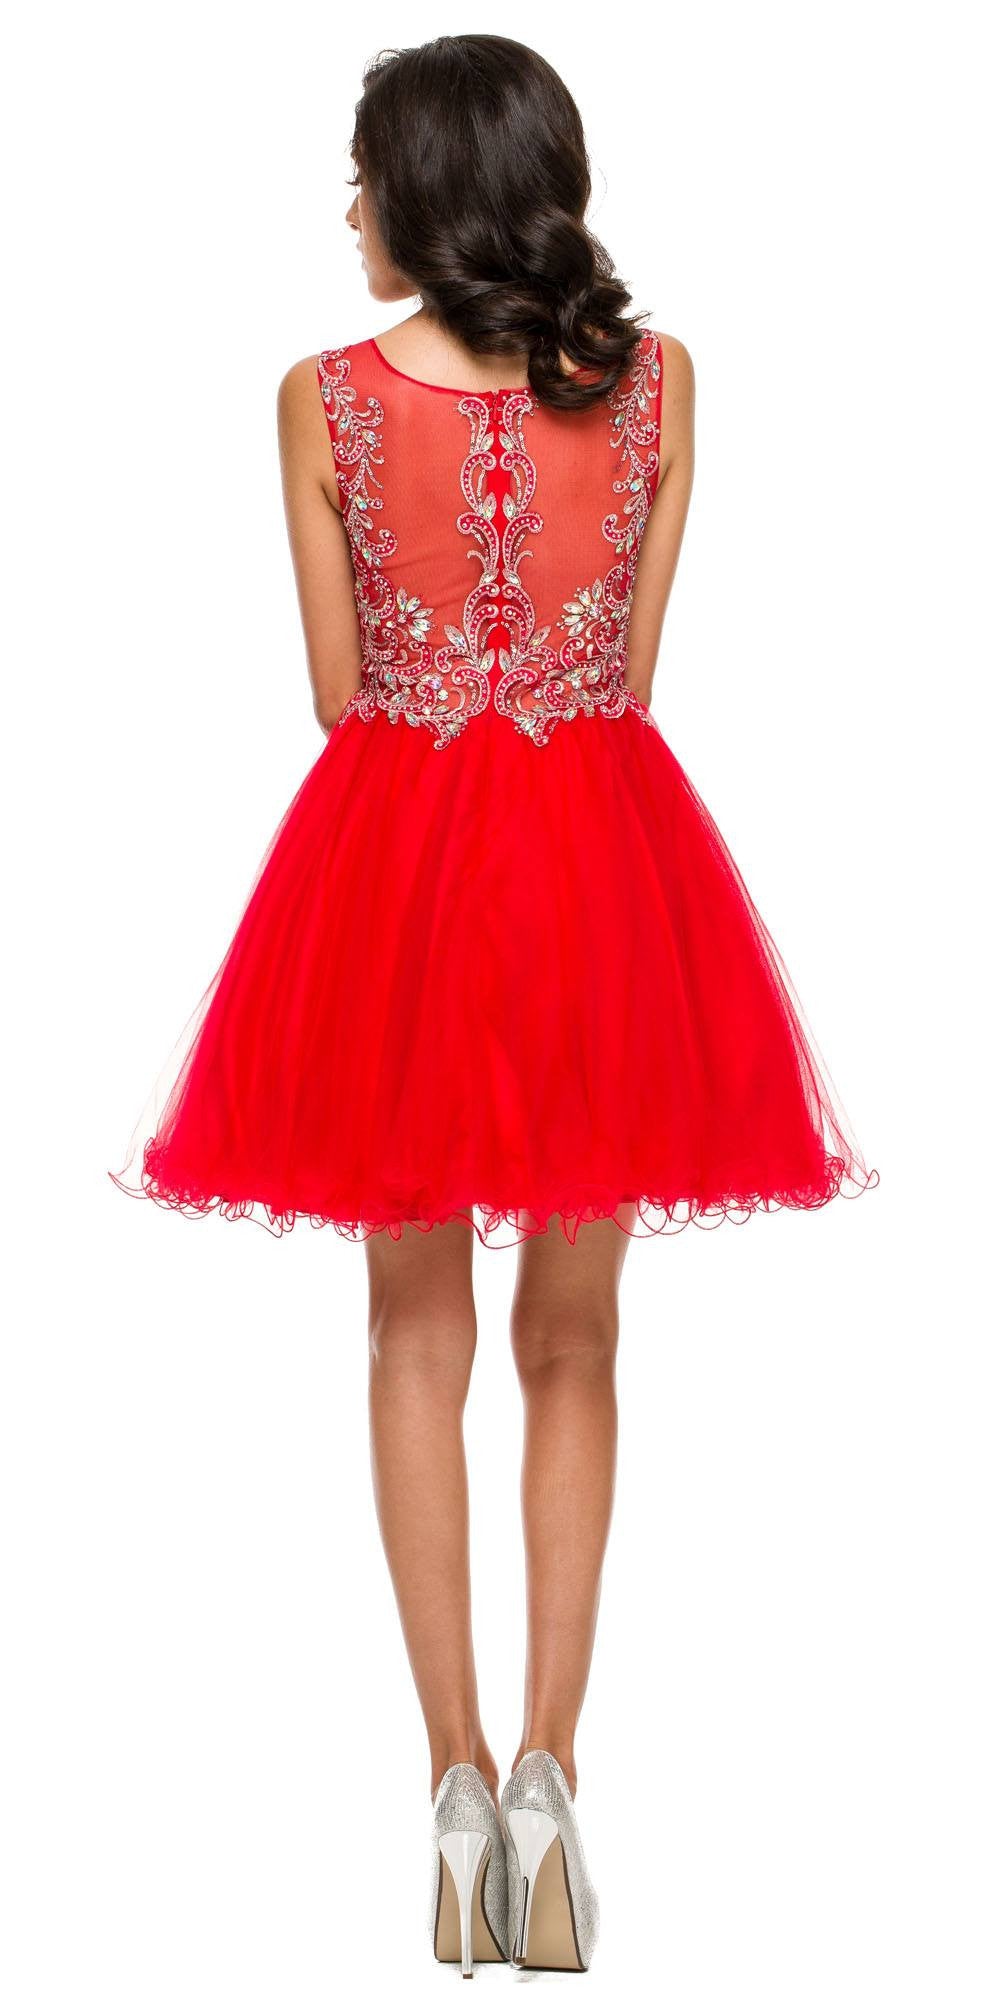 Poofy A Line Red Short Homecoming Dress Tulle Embroidery Back